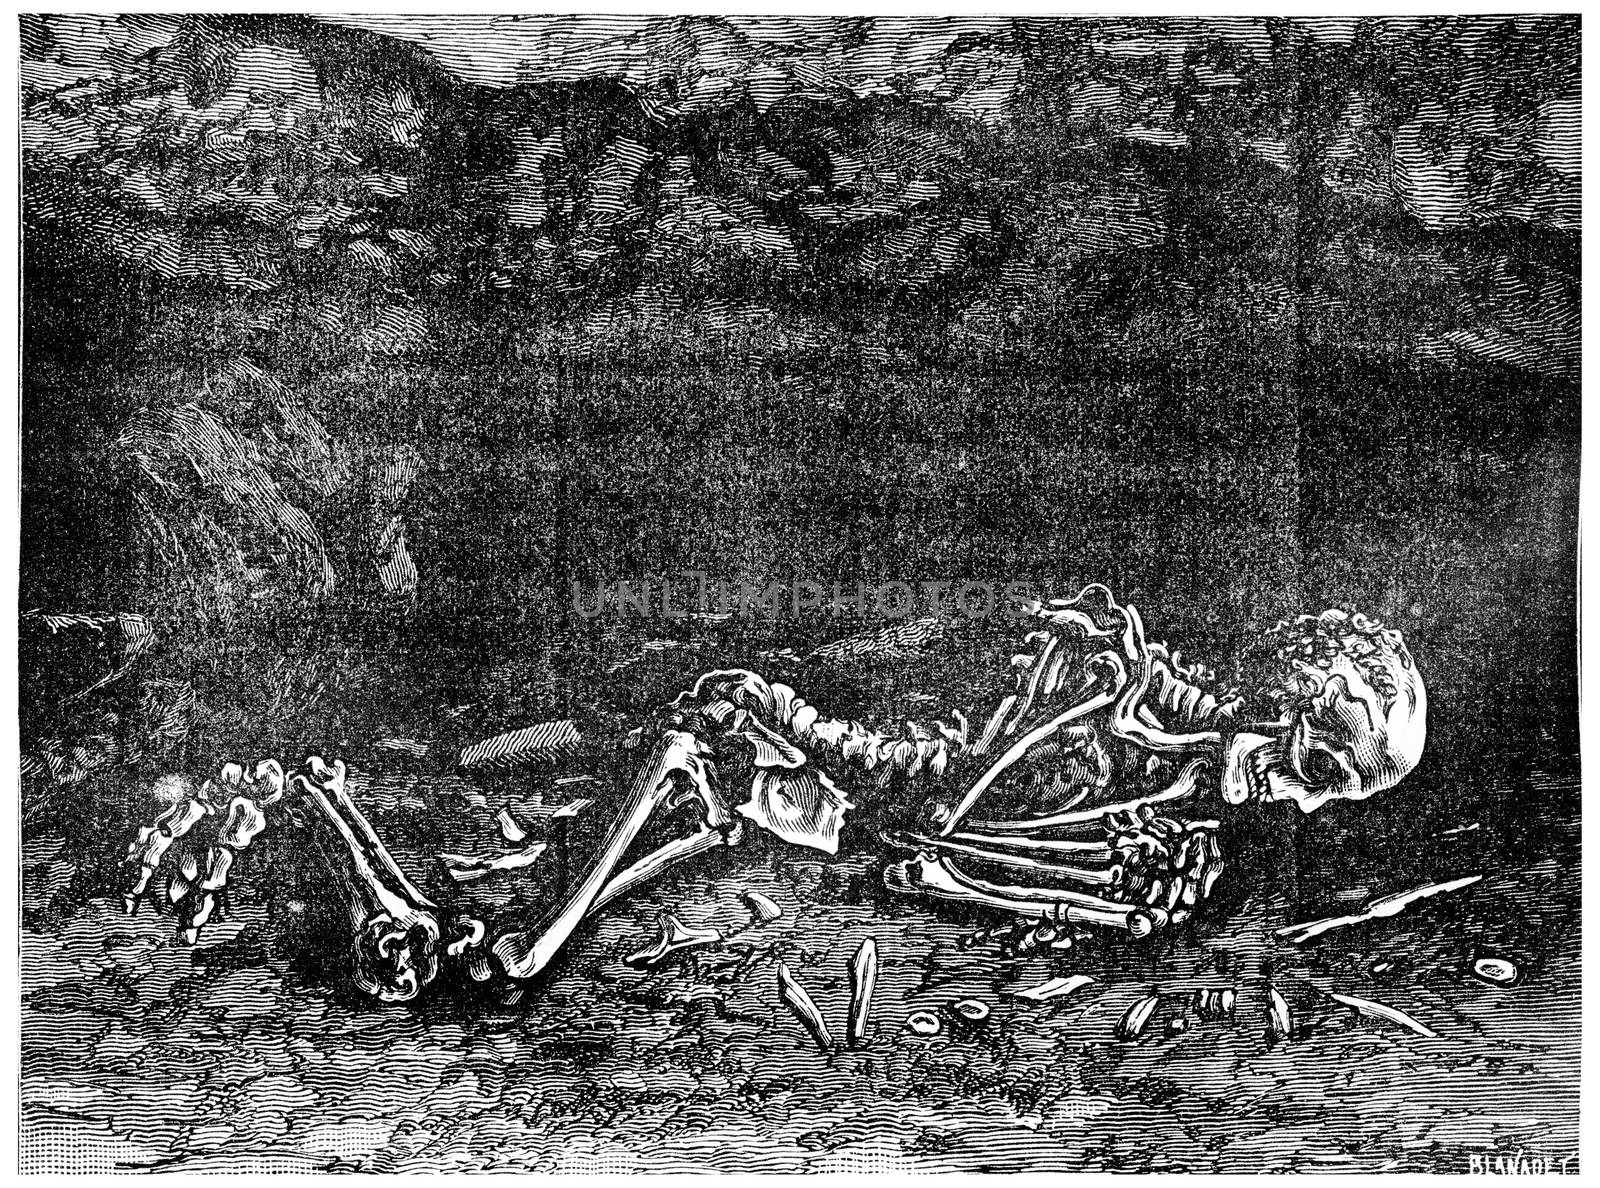 The fossil man found in 1872 in a cave in Menton, now in the Museum of Paris, vintage engraved illustration. Earth before man – 1886.